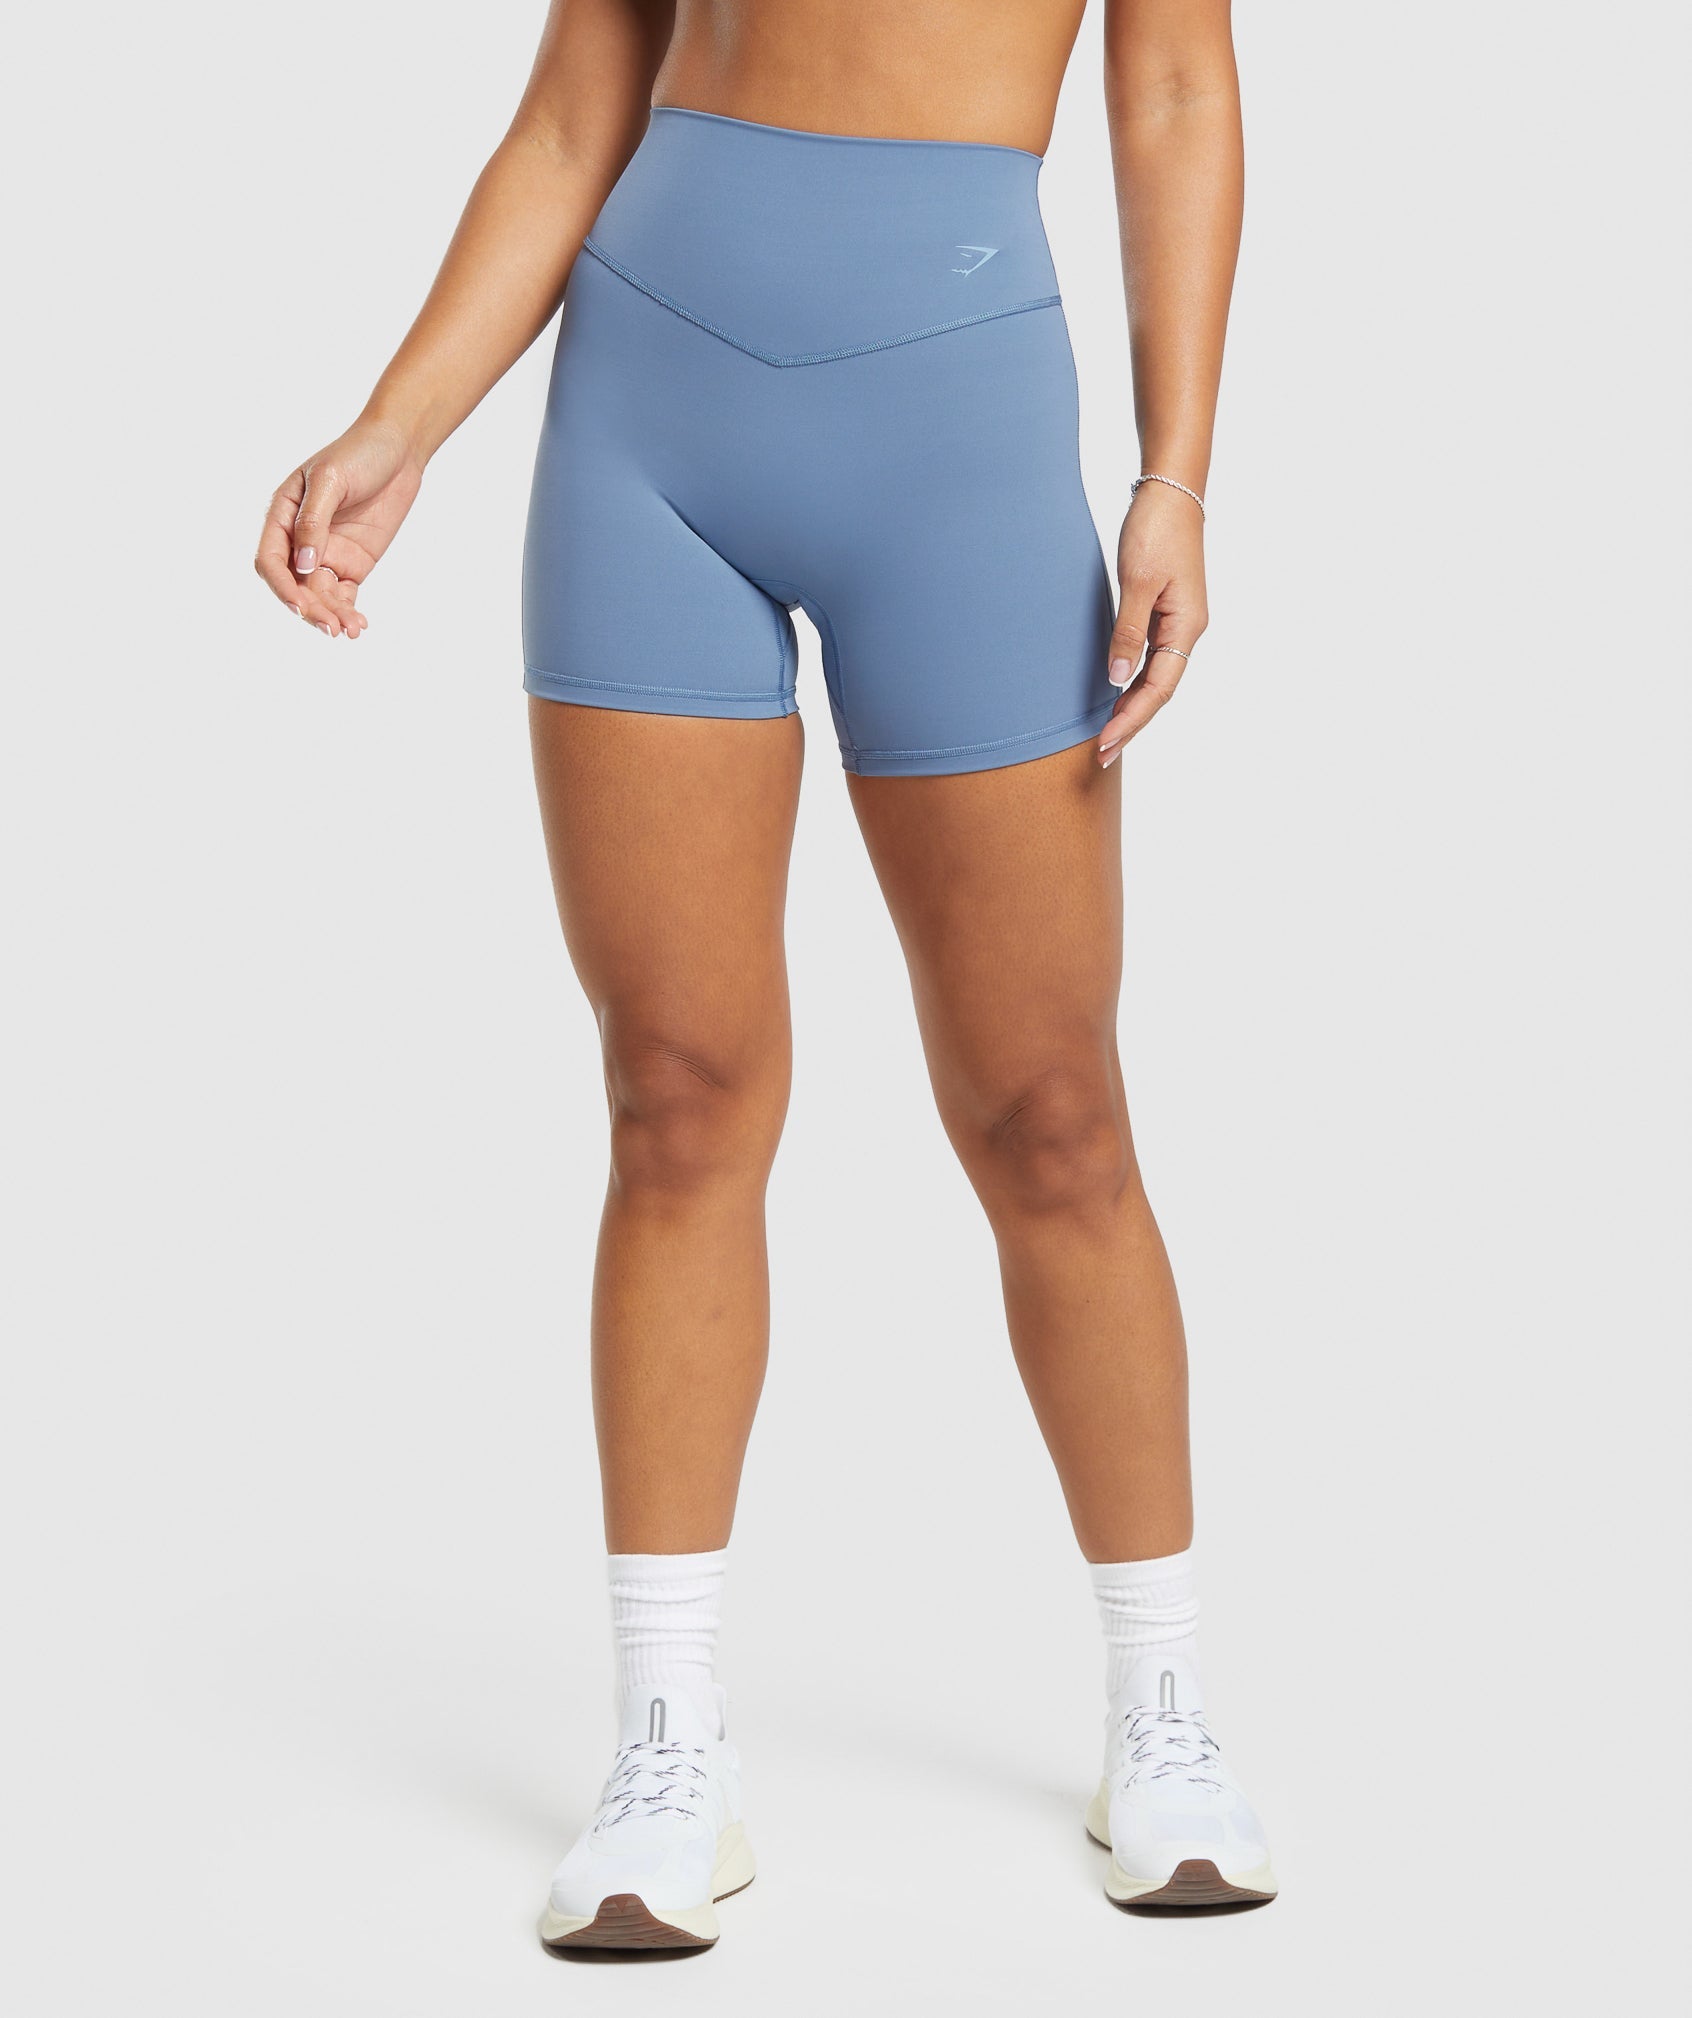 Elevate Shorts in Faded Blue - view 1